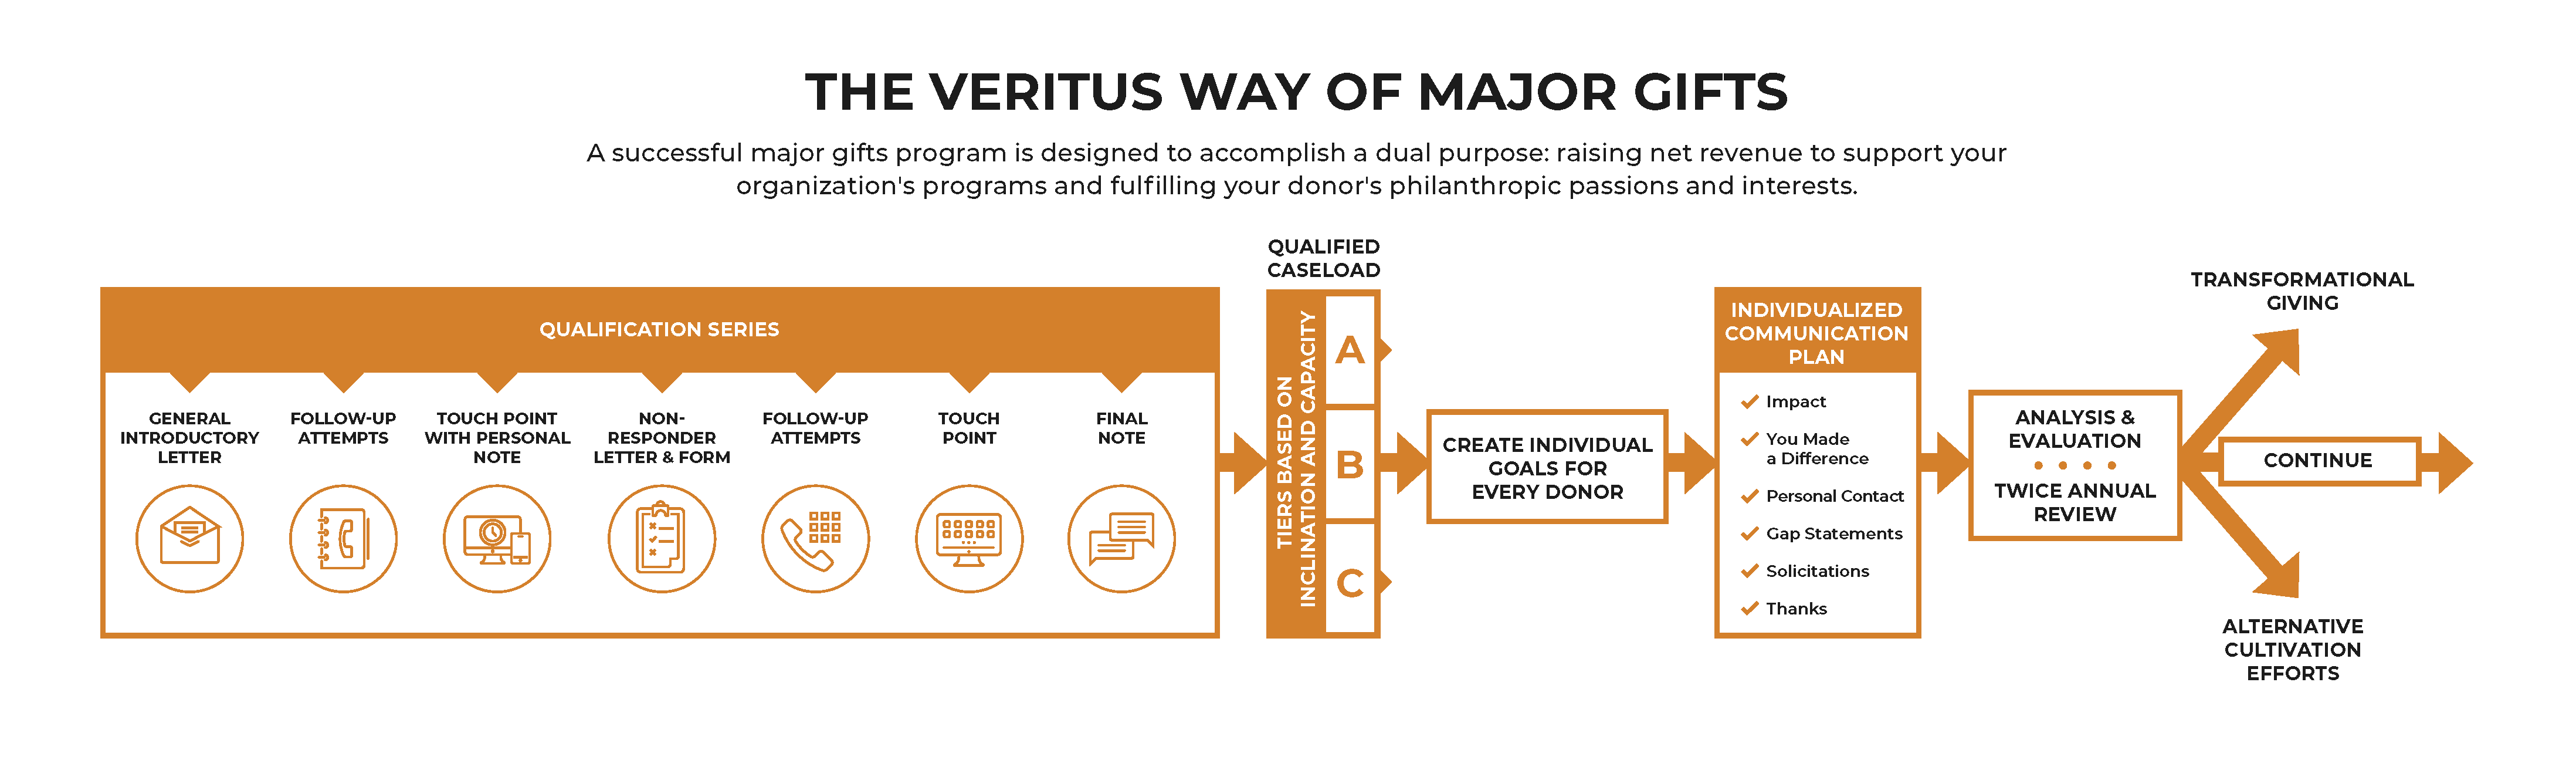 A graphic detailing The Veritus Way of Major Gifts, including the Donor Qualification process, building goals and individual communication plans, and overall caseload management strategy.